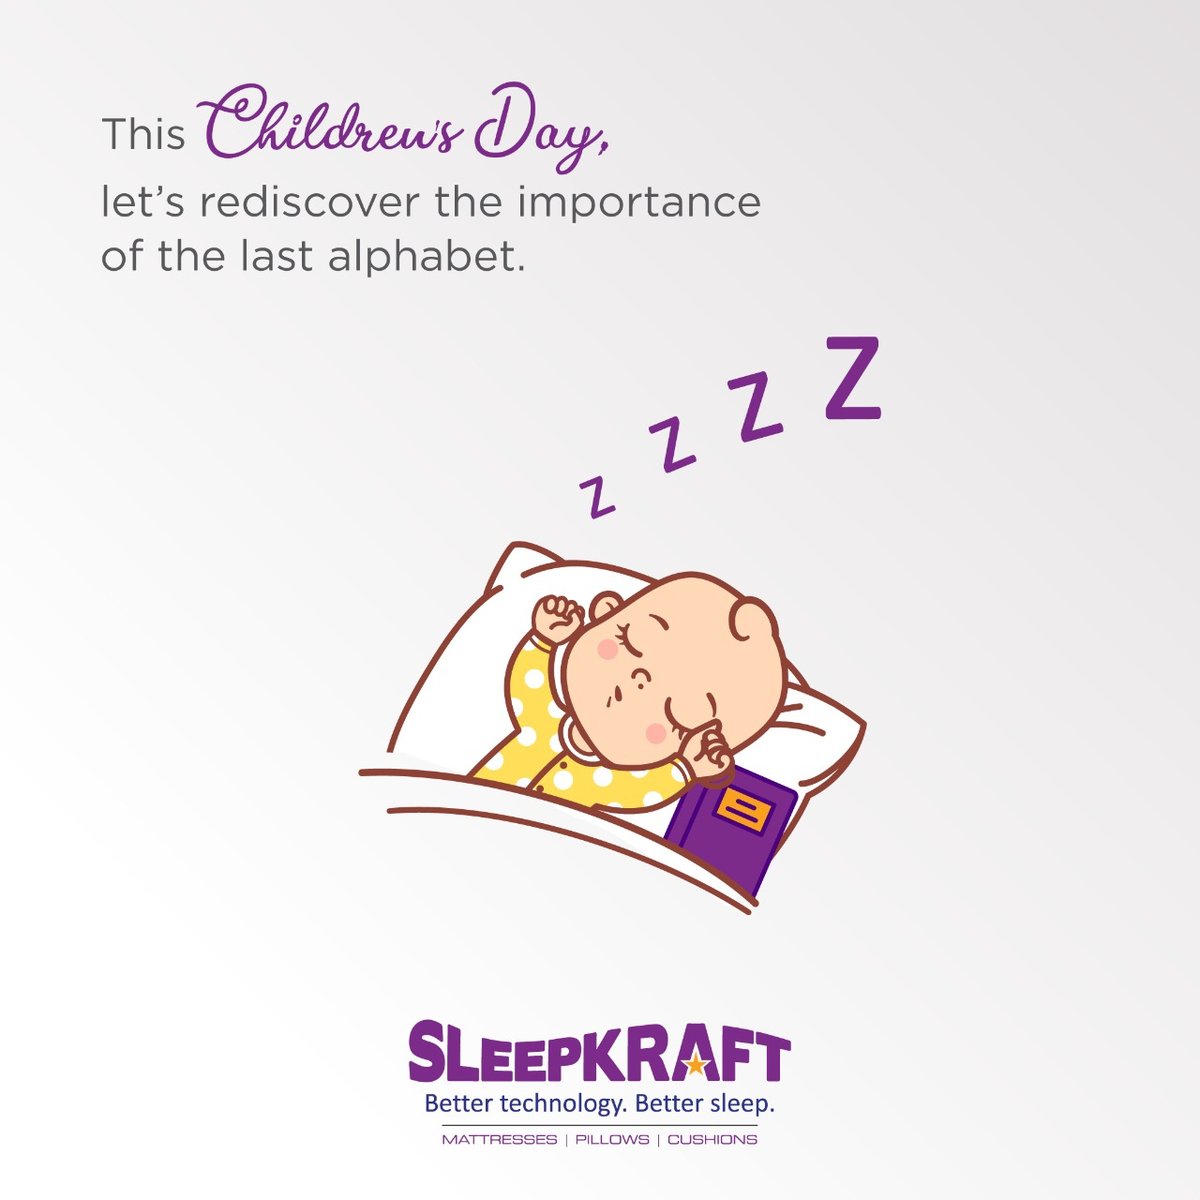 Sleepkraft A For Apple B For Ball Zzzzzz For Bettersleep And A Healthier Lifestyle Let S Teach The Bearers Of Our Future The Importance Of Goodsleep Let S All Sleep Better